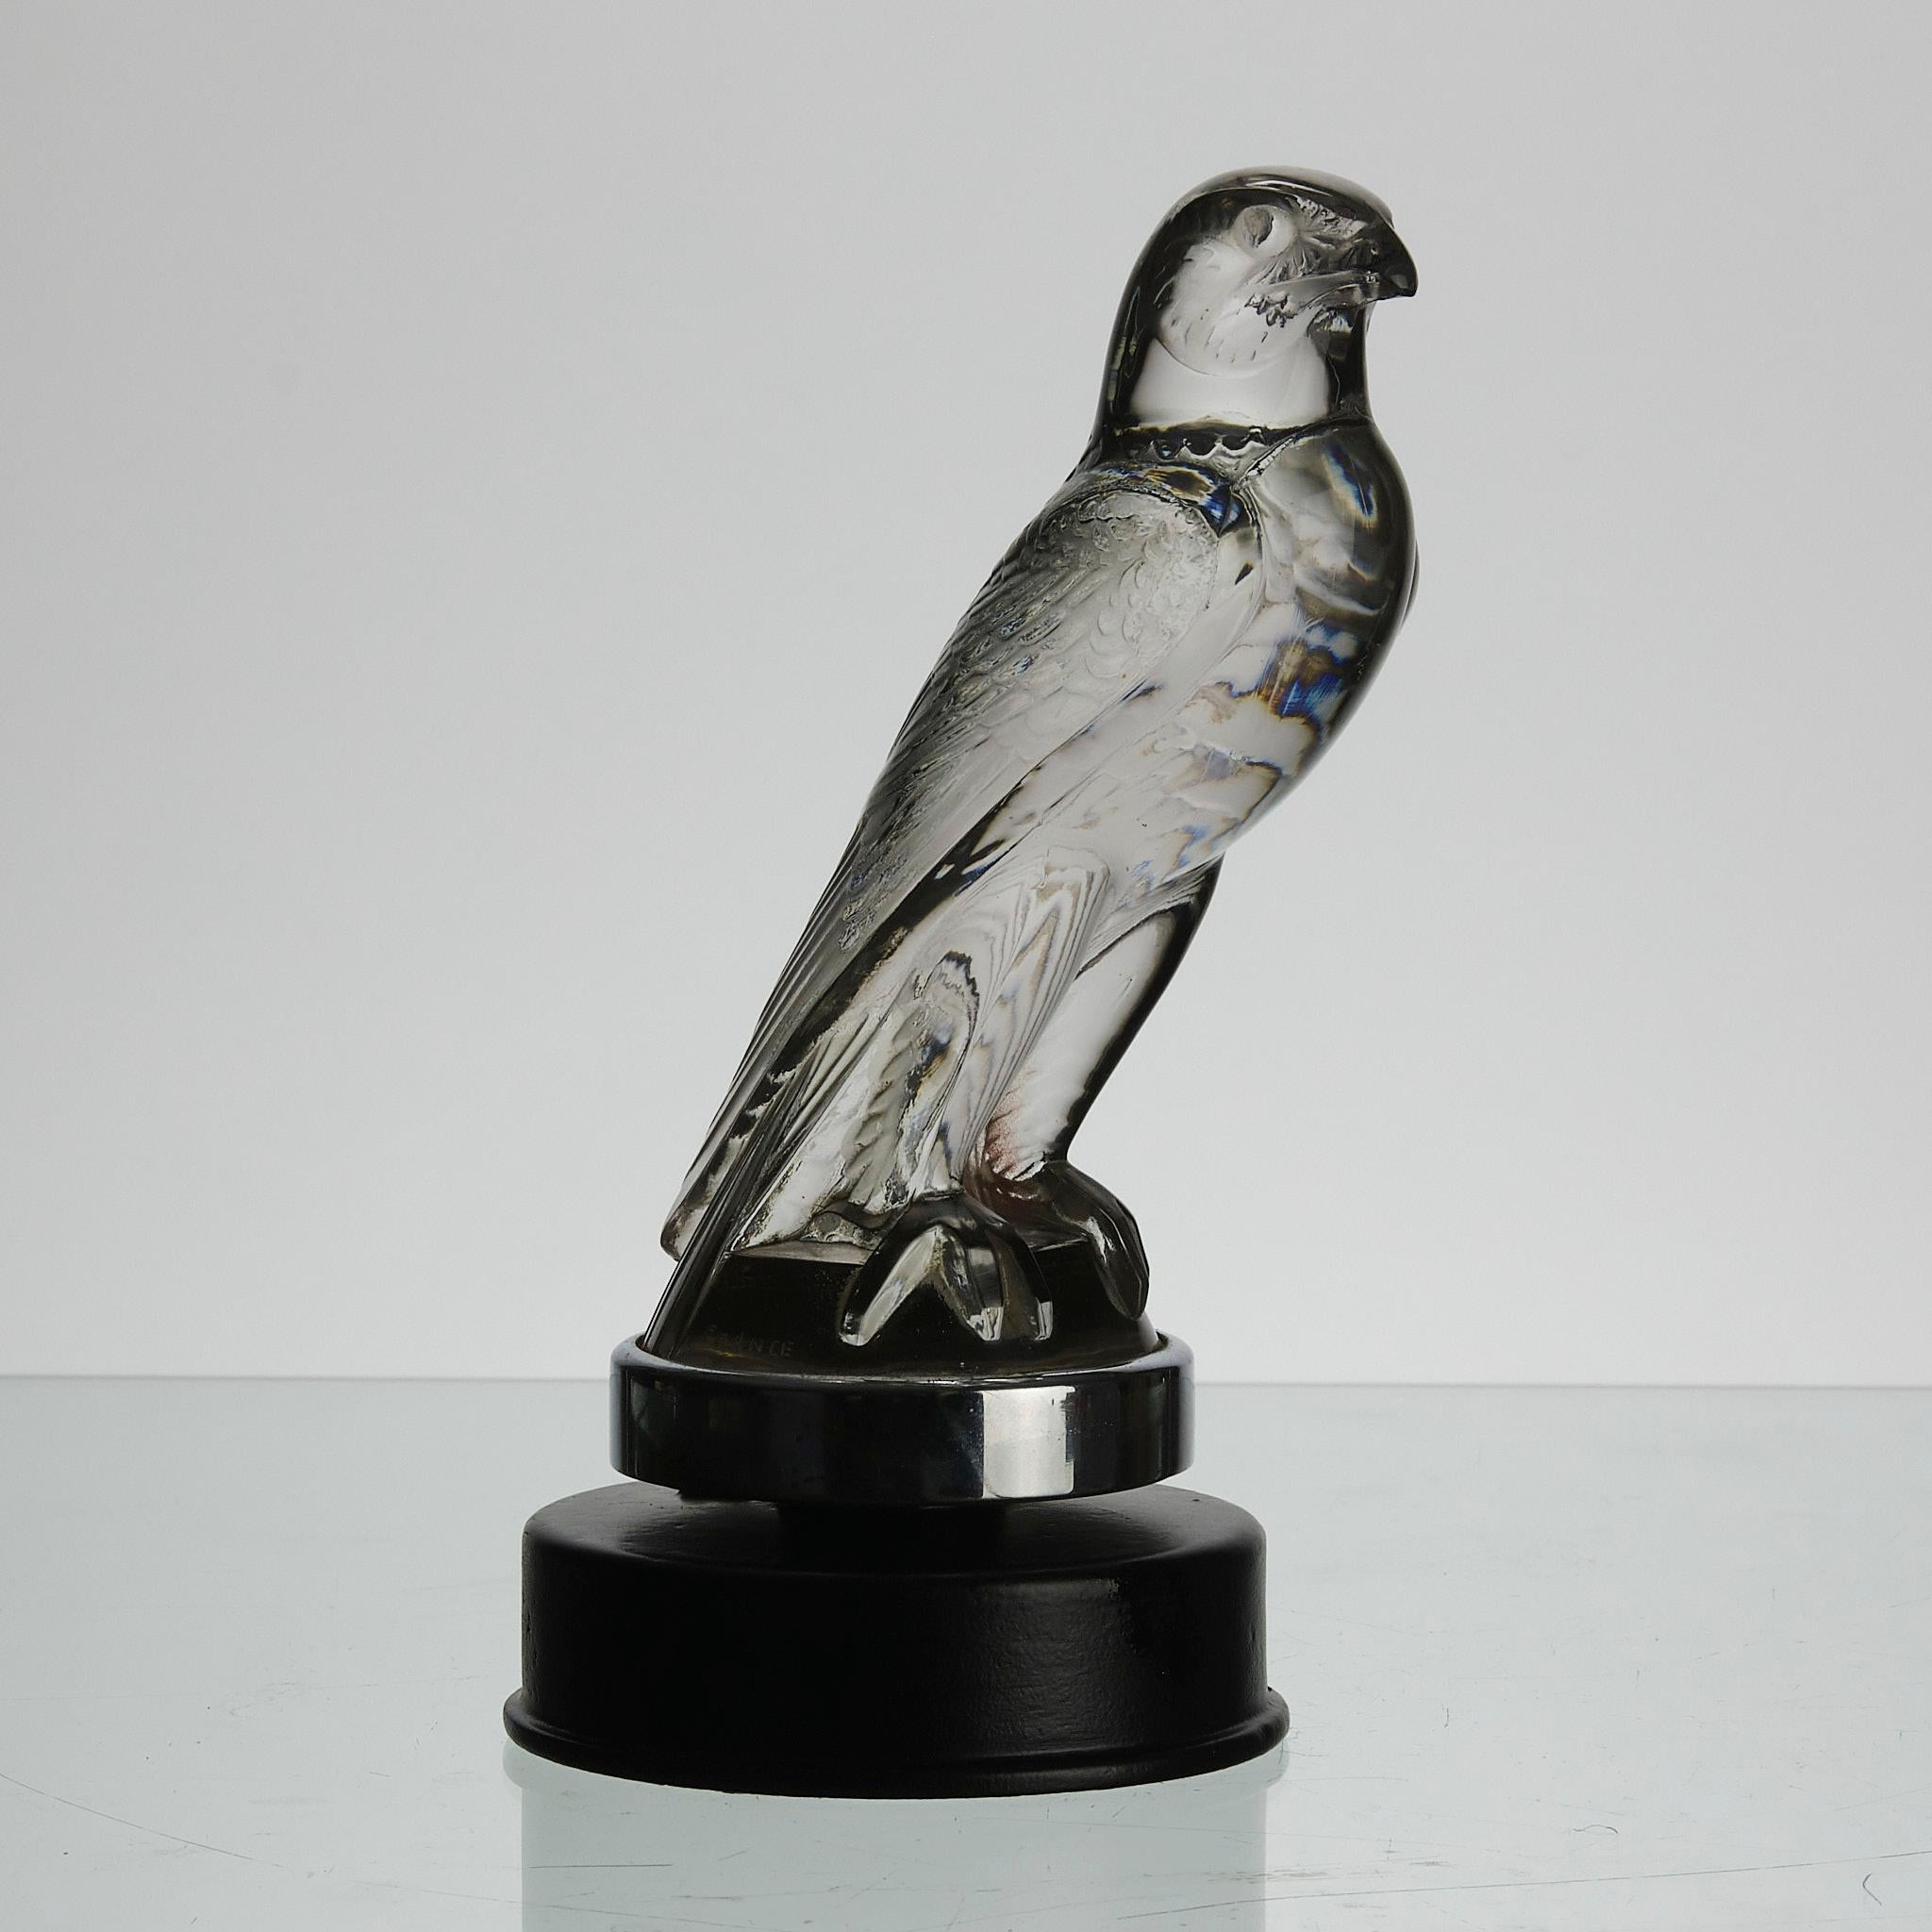 Molded Early 20th Century Art Deco Glass Mascot entitled 